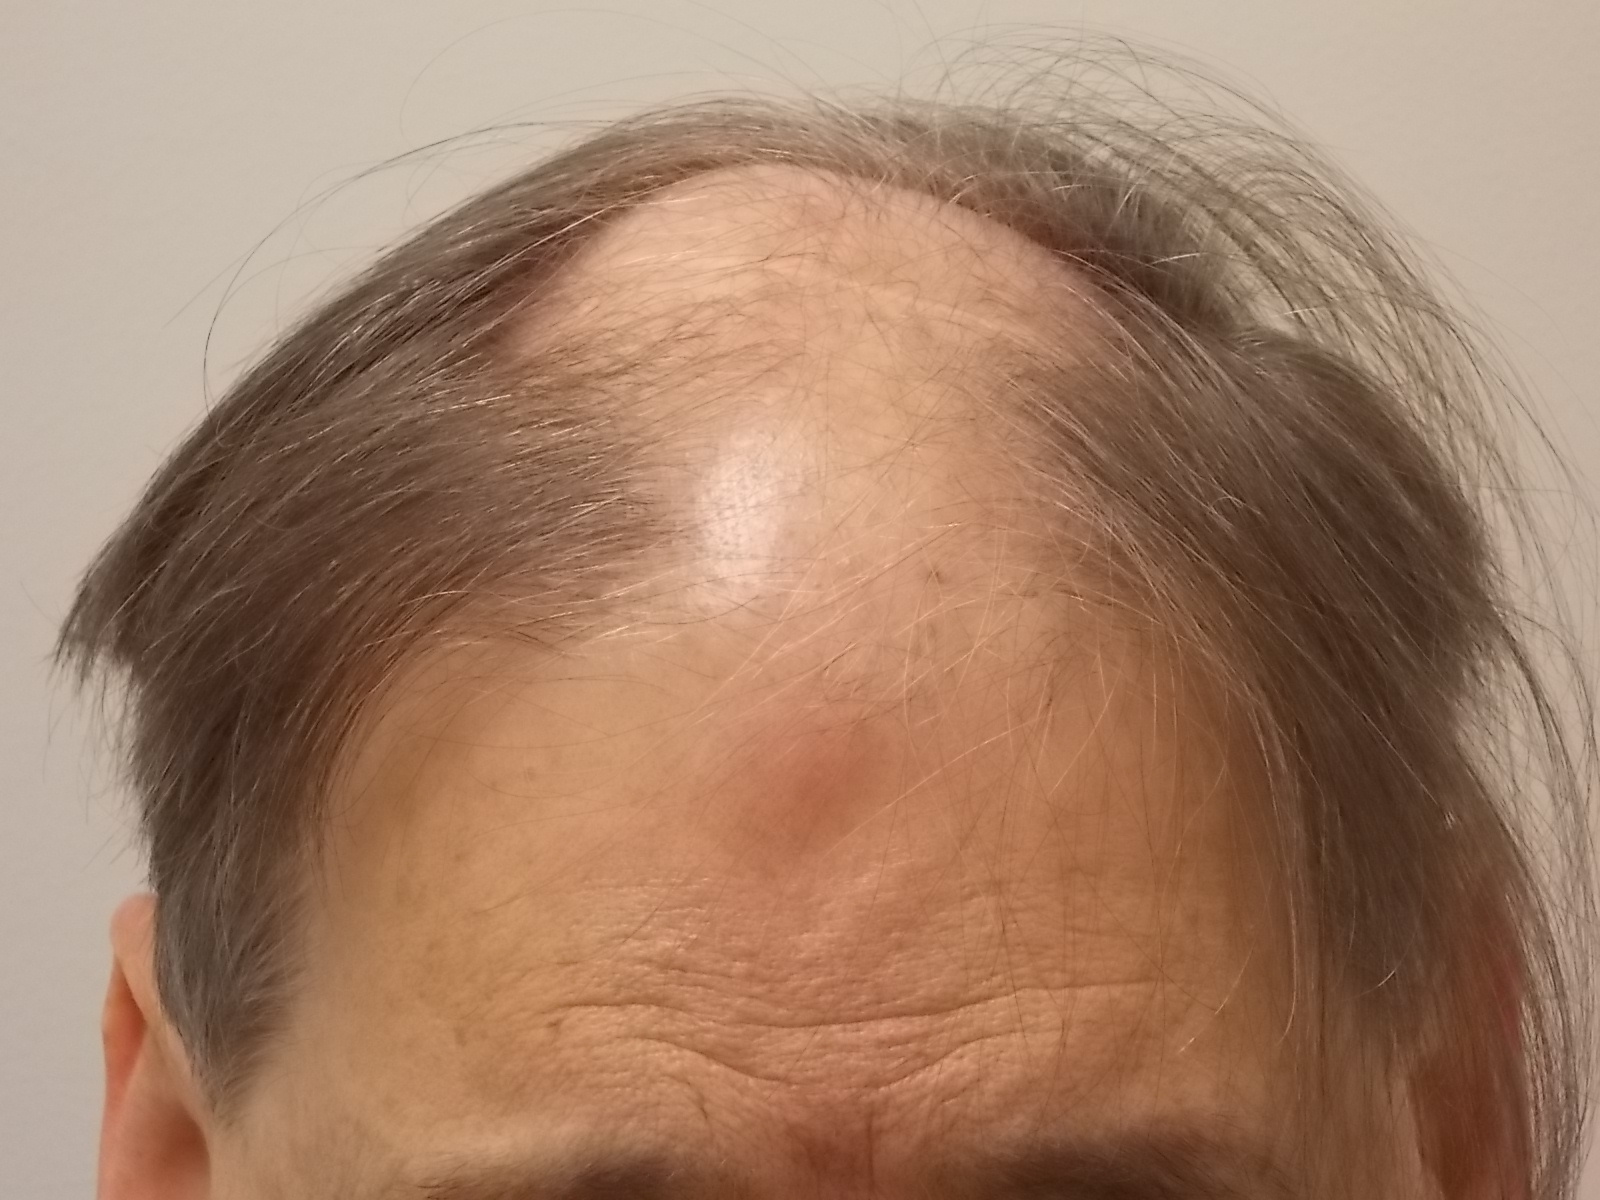 Before surgery; Balding area exposed under comb over